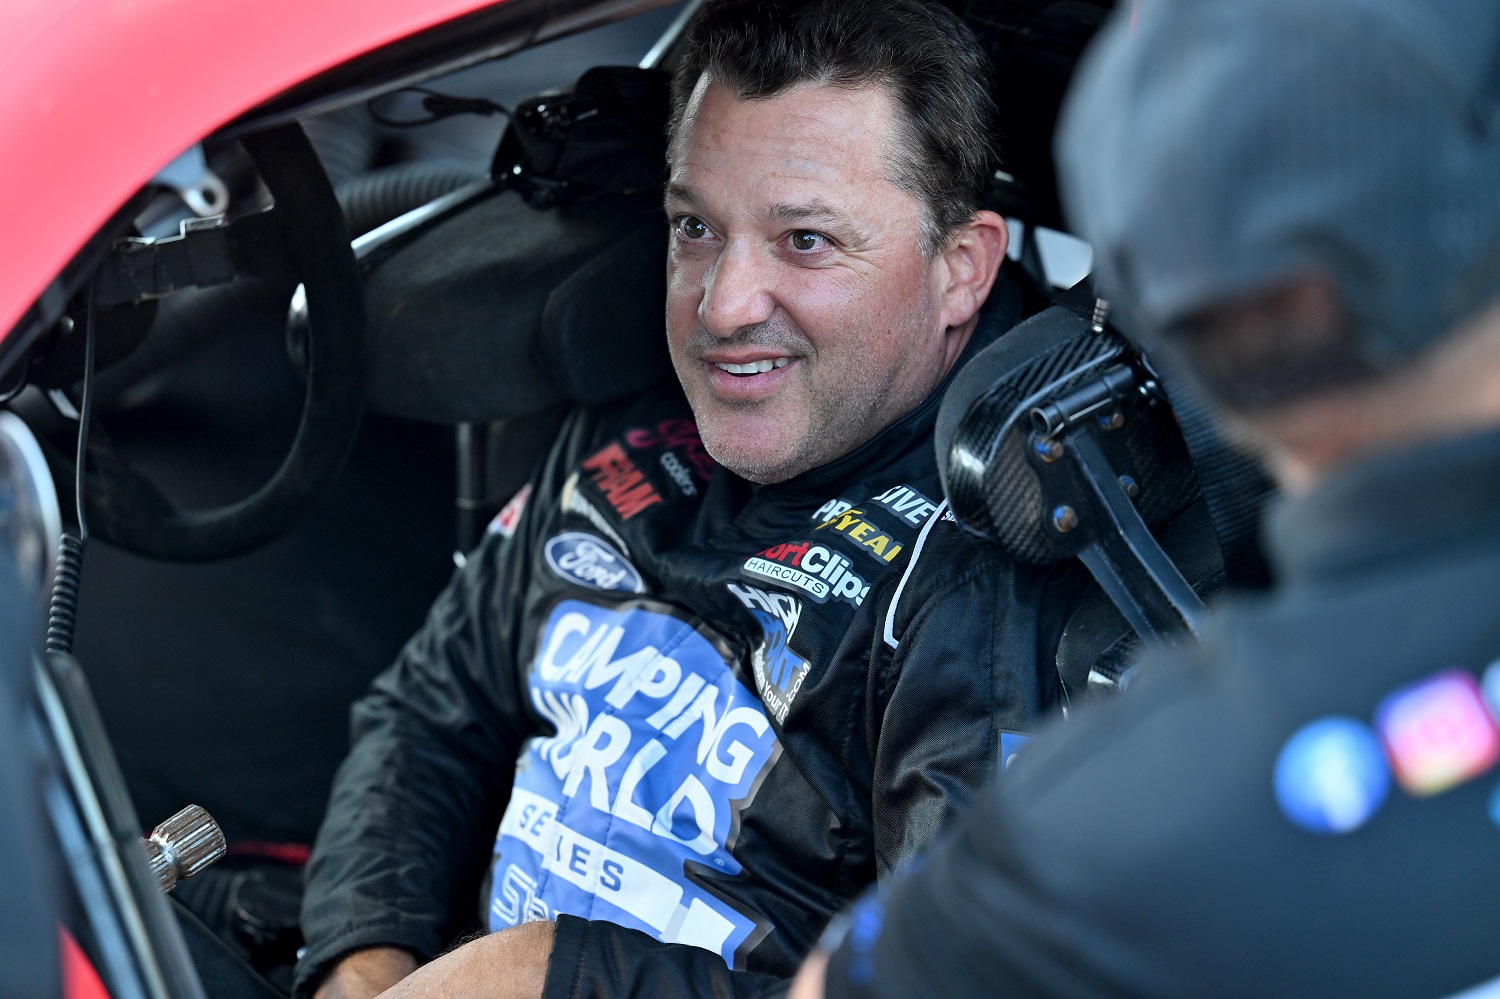 Tony Stewart talks with his crew prior to the start of the SRX qualifying race at Sharon Speedway on July 23, 2022. | Jason Miller/SRX/Getty Images